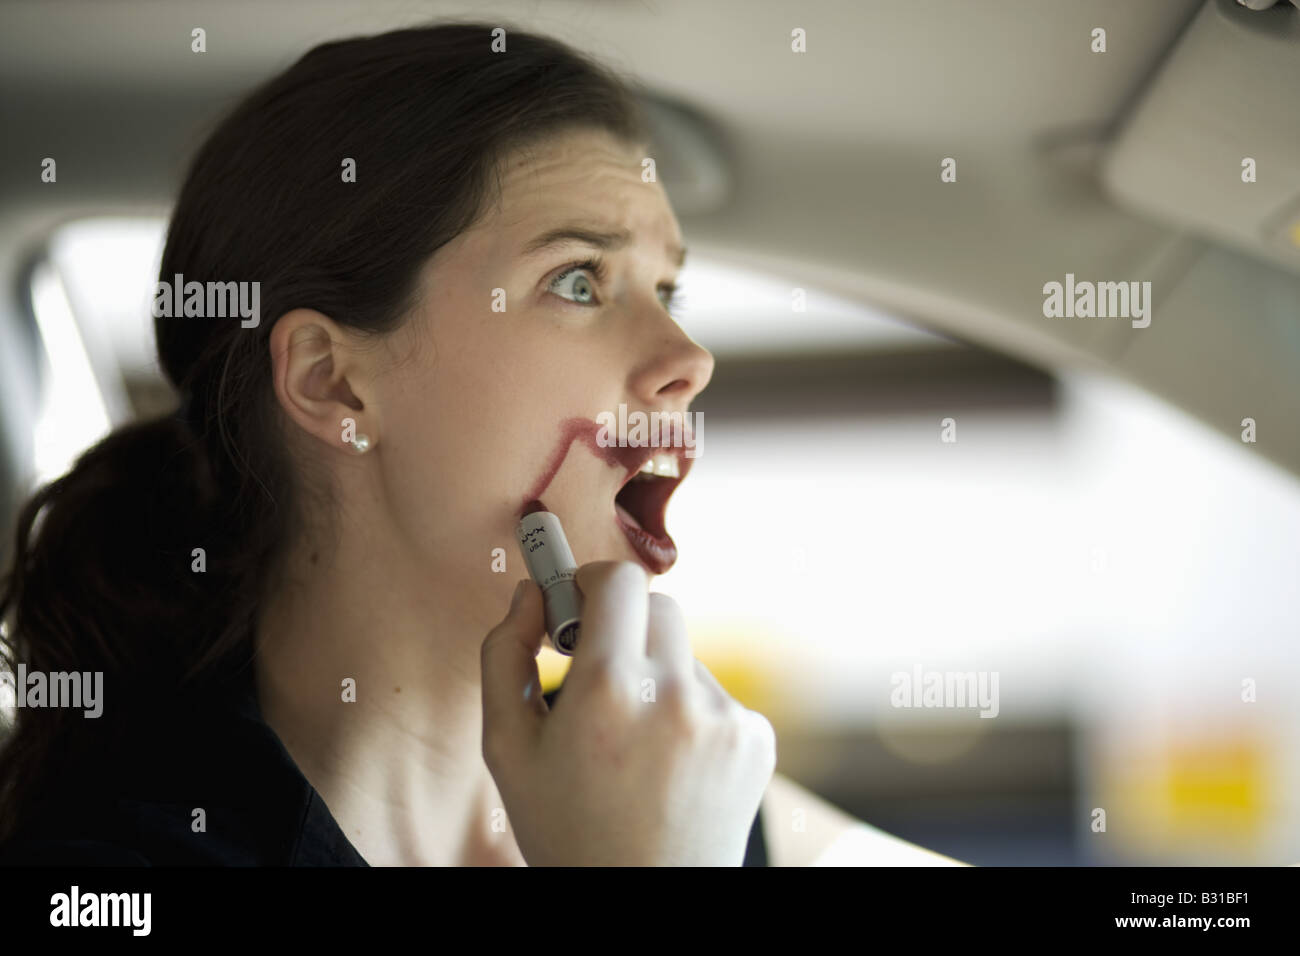 Young woman in car with smudged lipstick Stock Photo